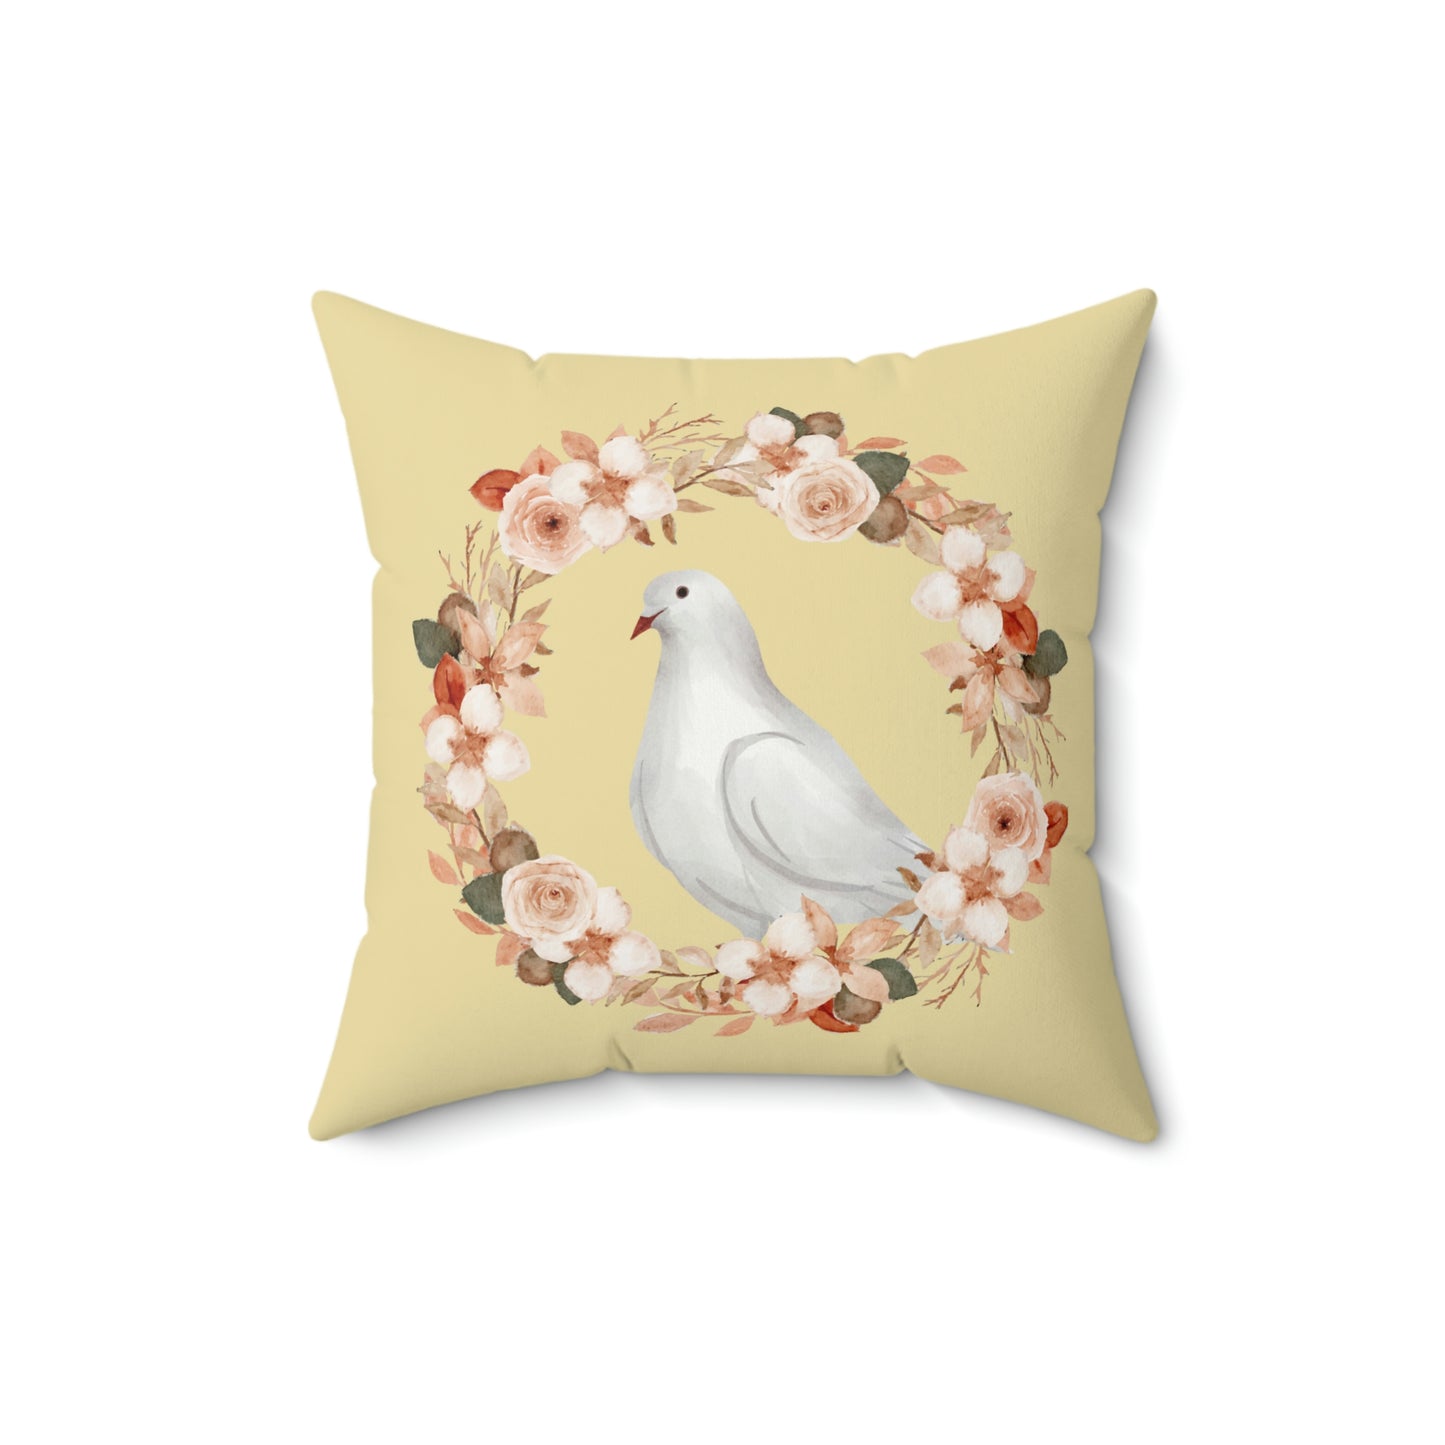 Pigeon/Dove Birds with Floral Wreath design Spun Polyester Square Indoor Pillow